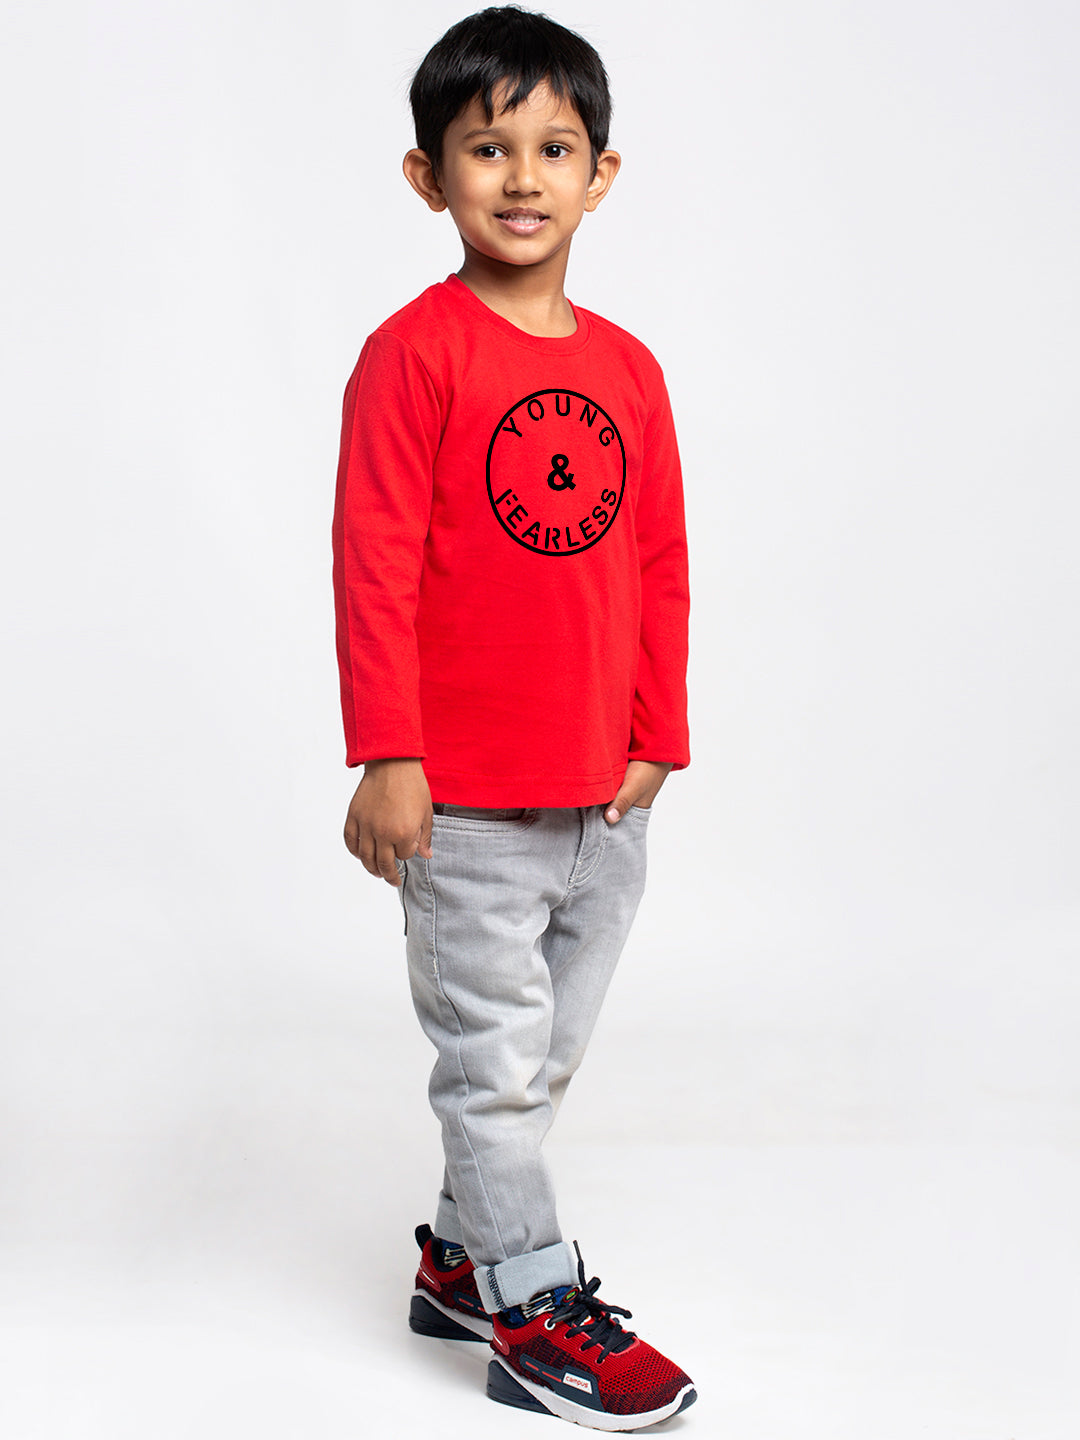 Kids Young Fearless printed full sleeves t-shirt - Friskers